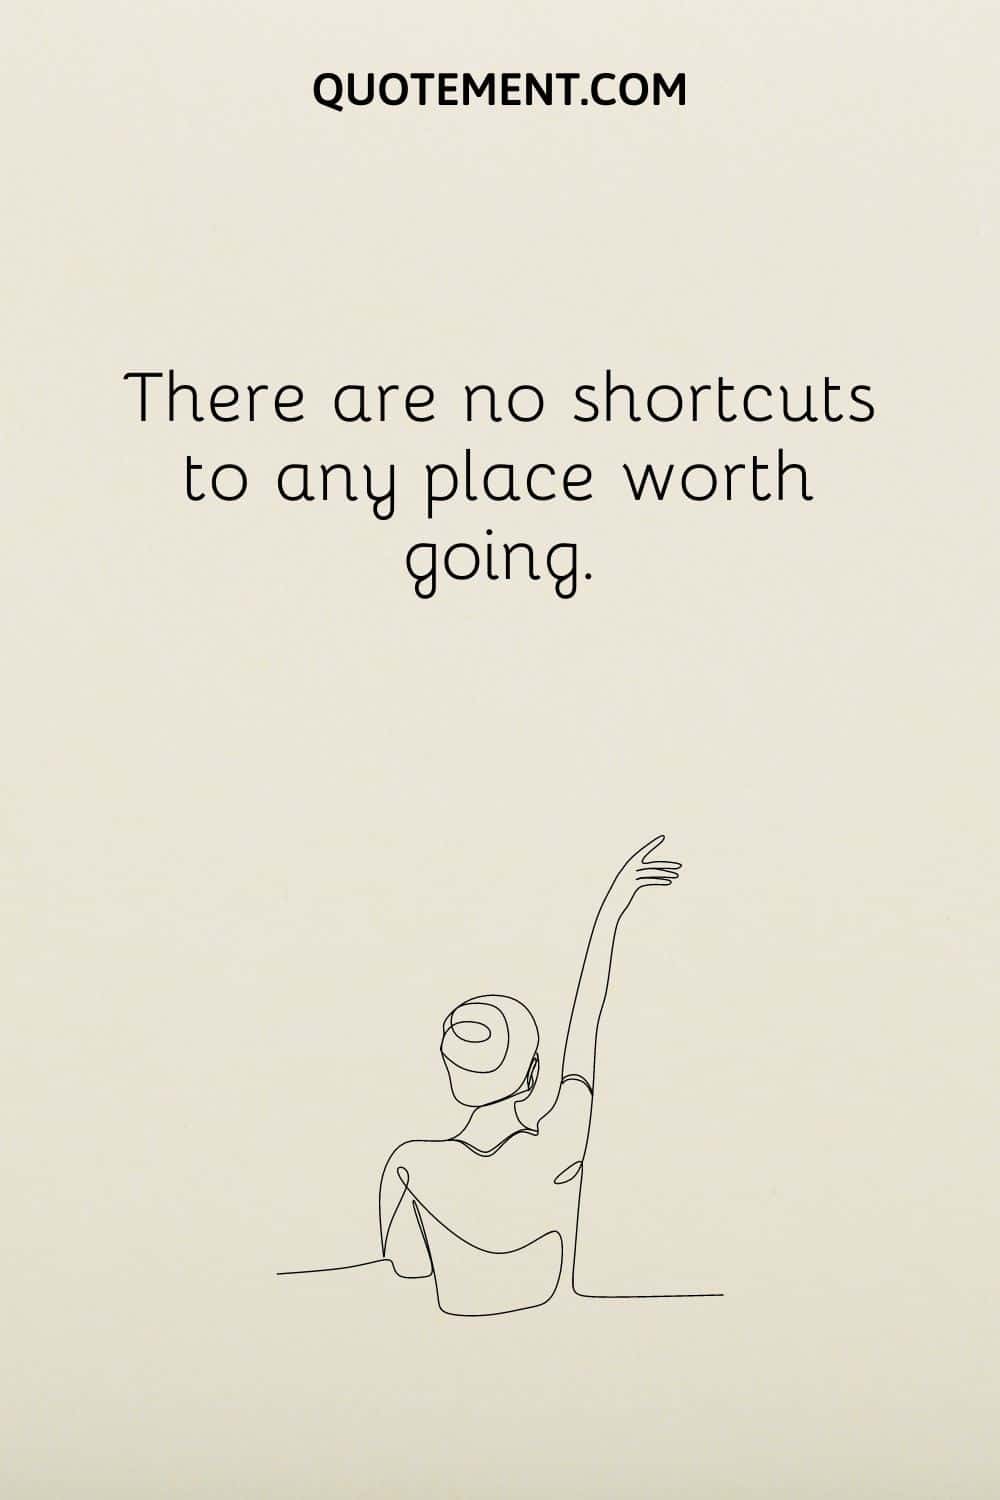 There are no shortcuts to any place worth going